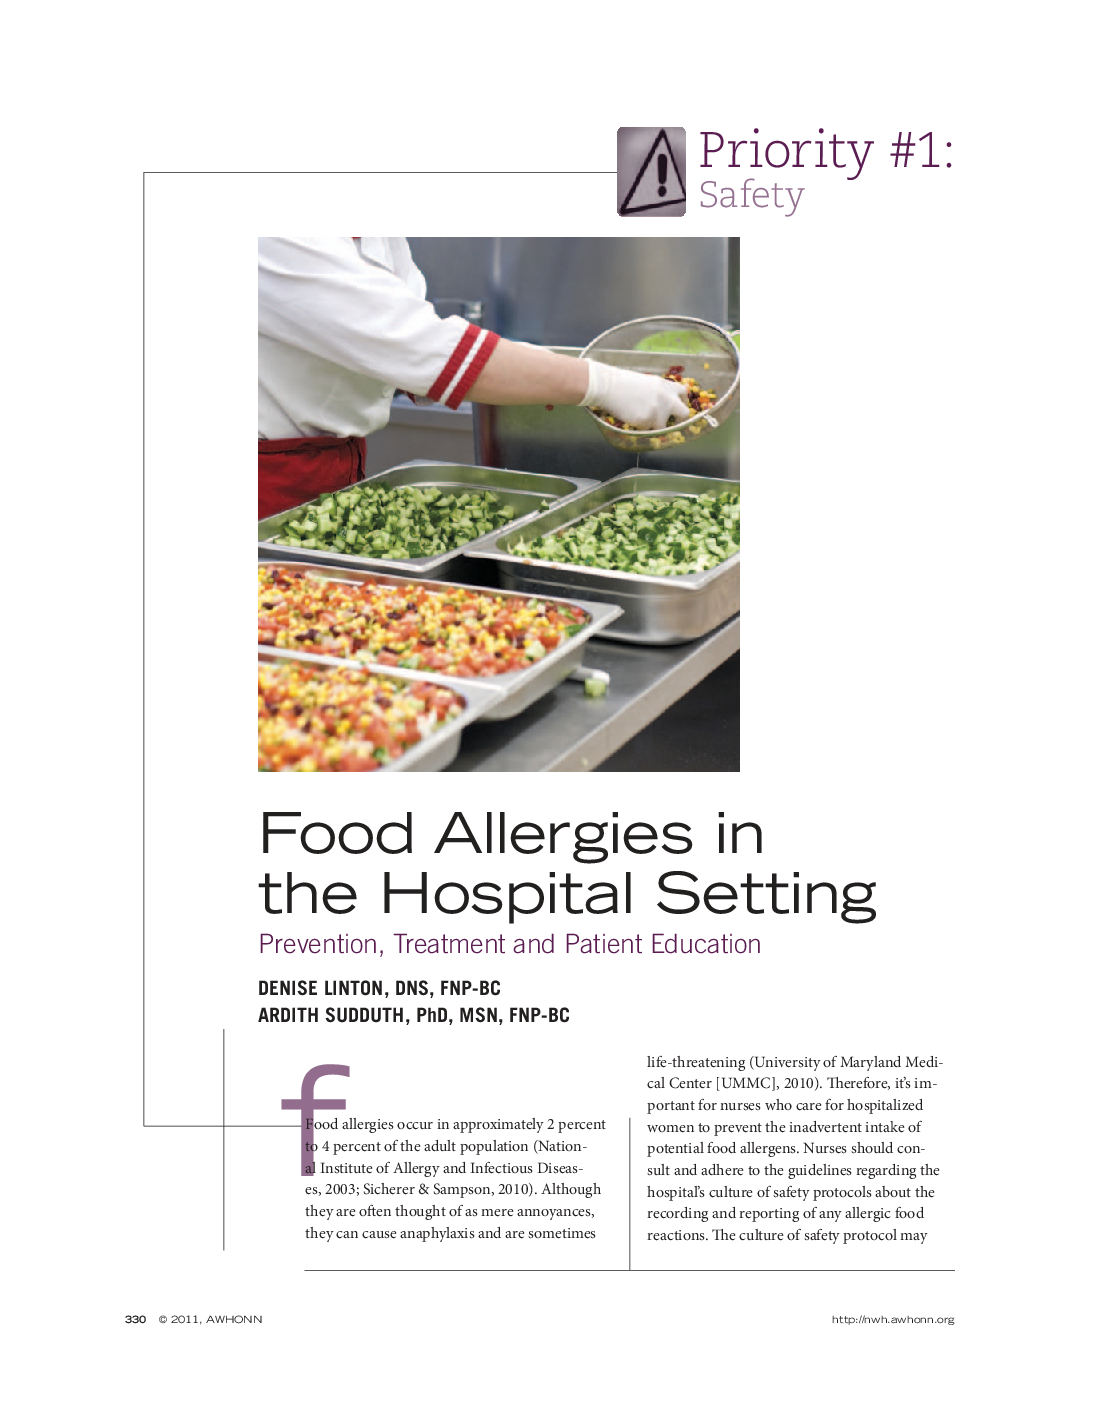 Food Allergies in the Hospital Setting: Prevention, Treatment and Patient Education